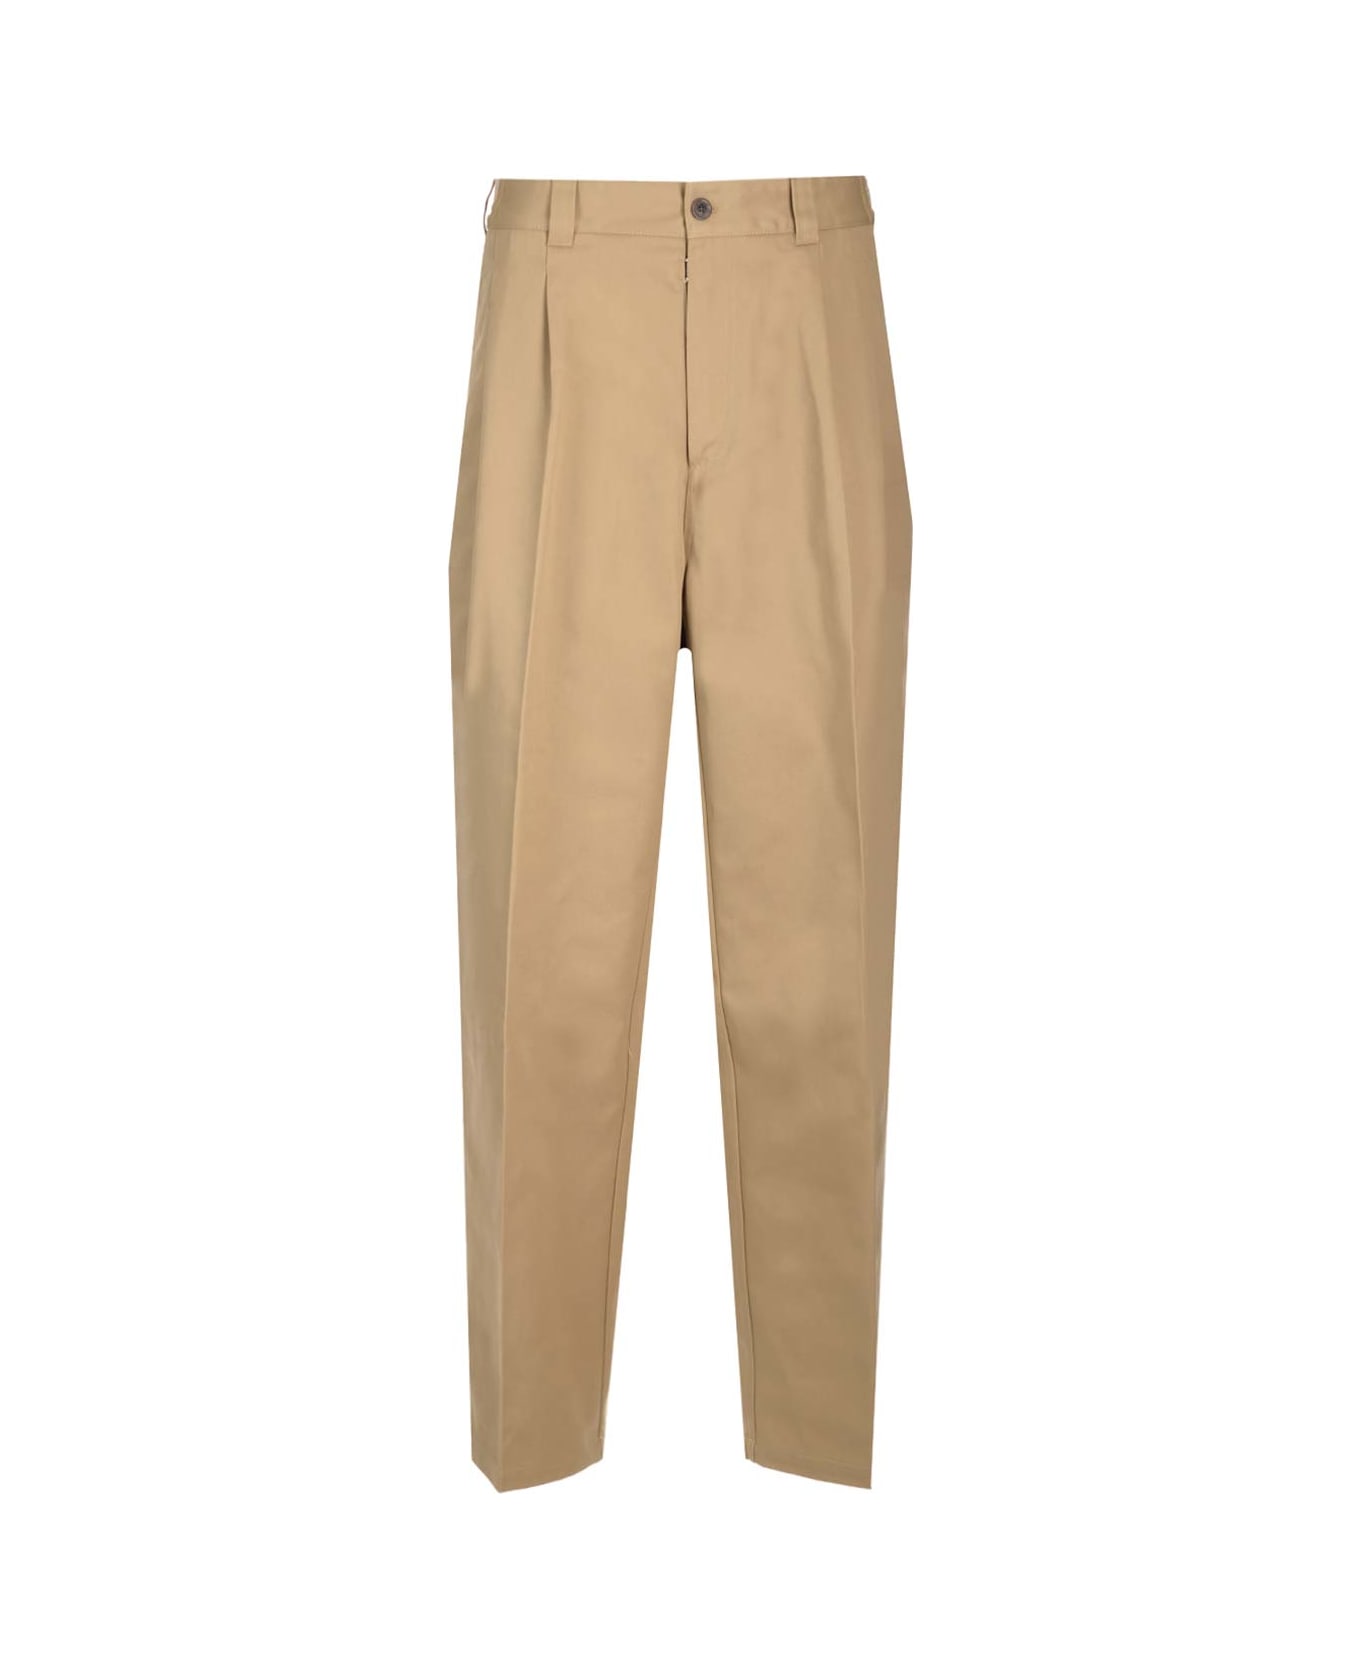 Maison Margiela Trousers With Checked Wool Insert - Beige